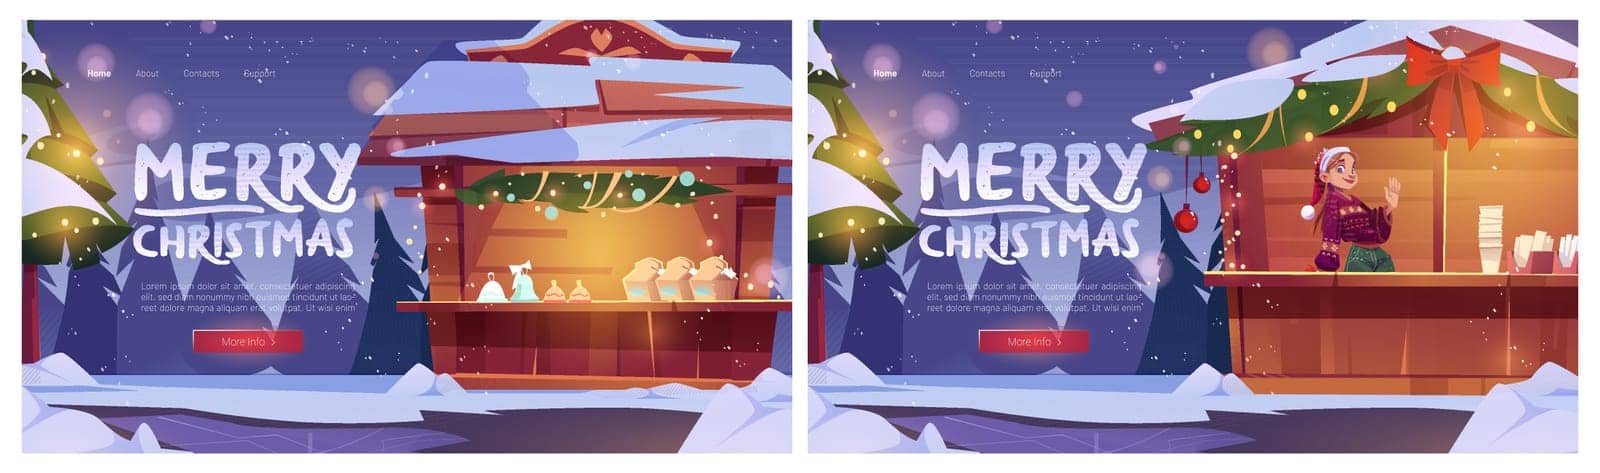 Christmas fair banners with market stalls, fir tree and snow on street. Vector landing page of traditional holiday marketplace with cartoon illustration of winter landscape with kiosks and girl vendor